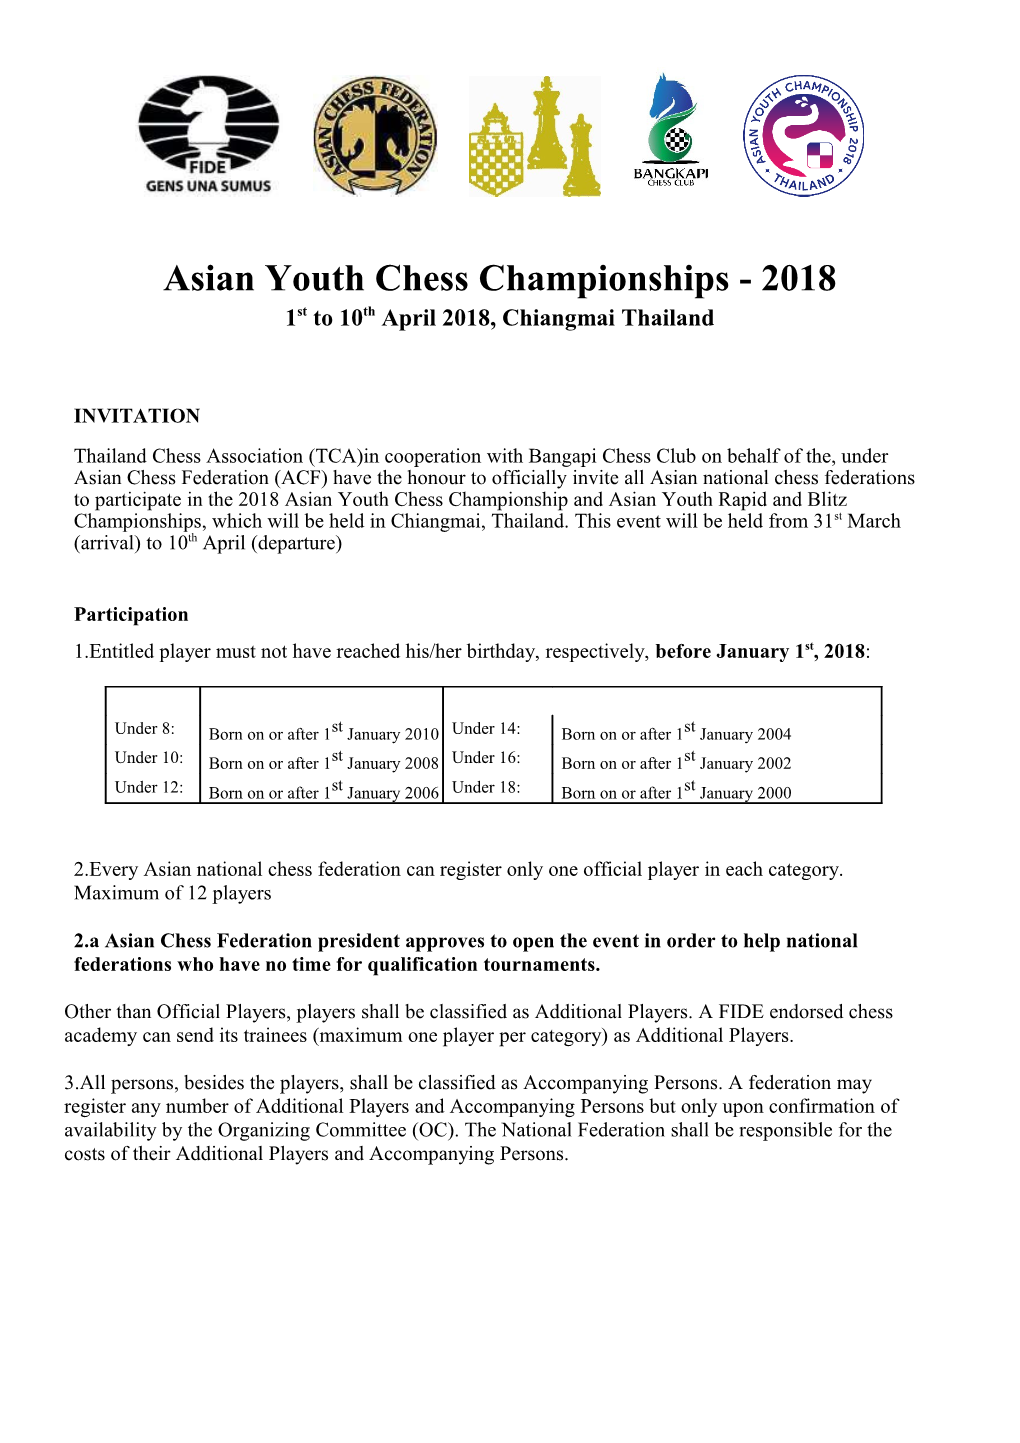 Asian Youth Chess Championships - 2018